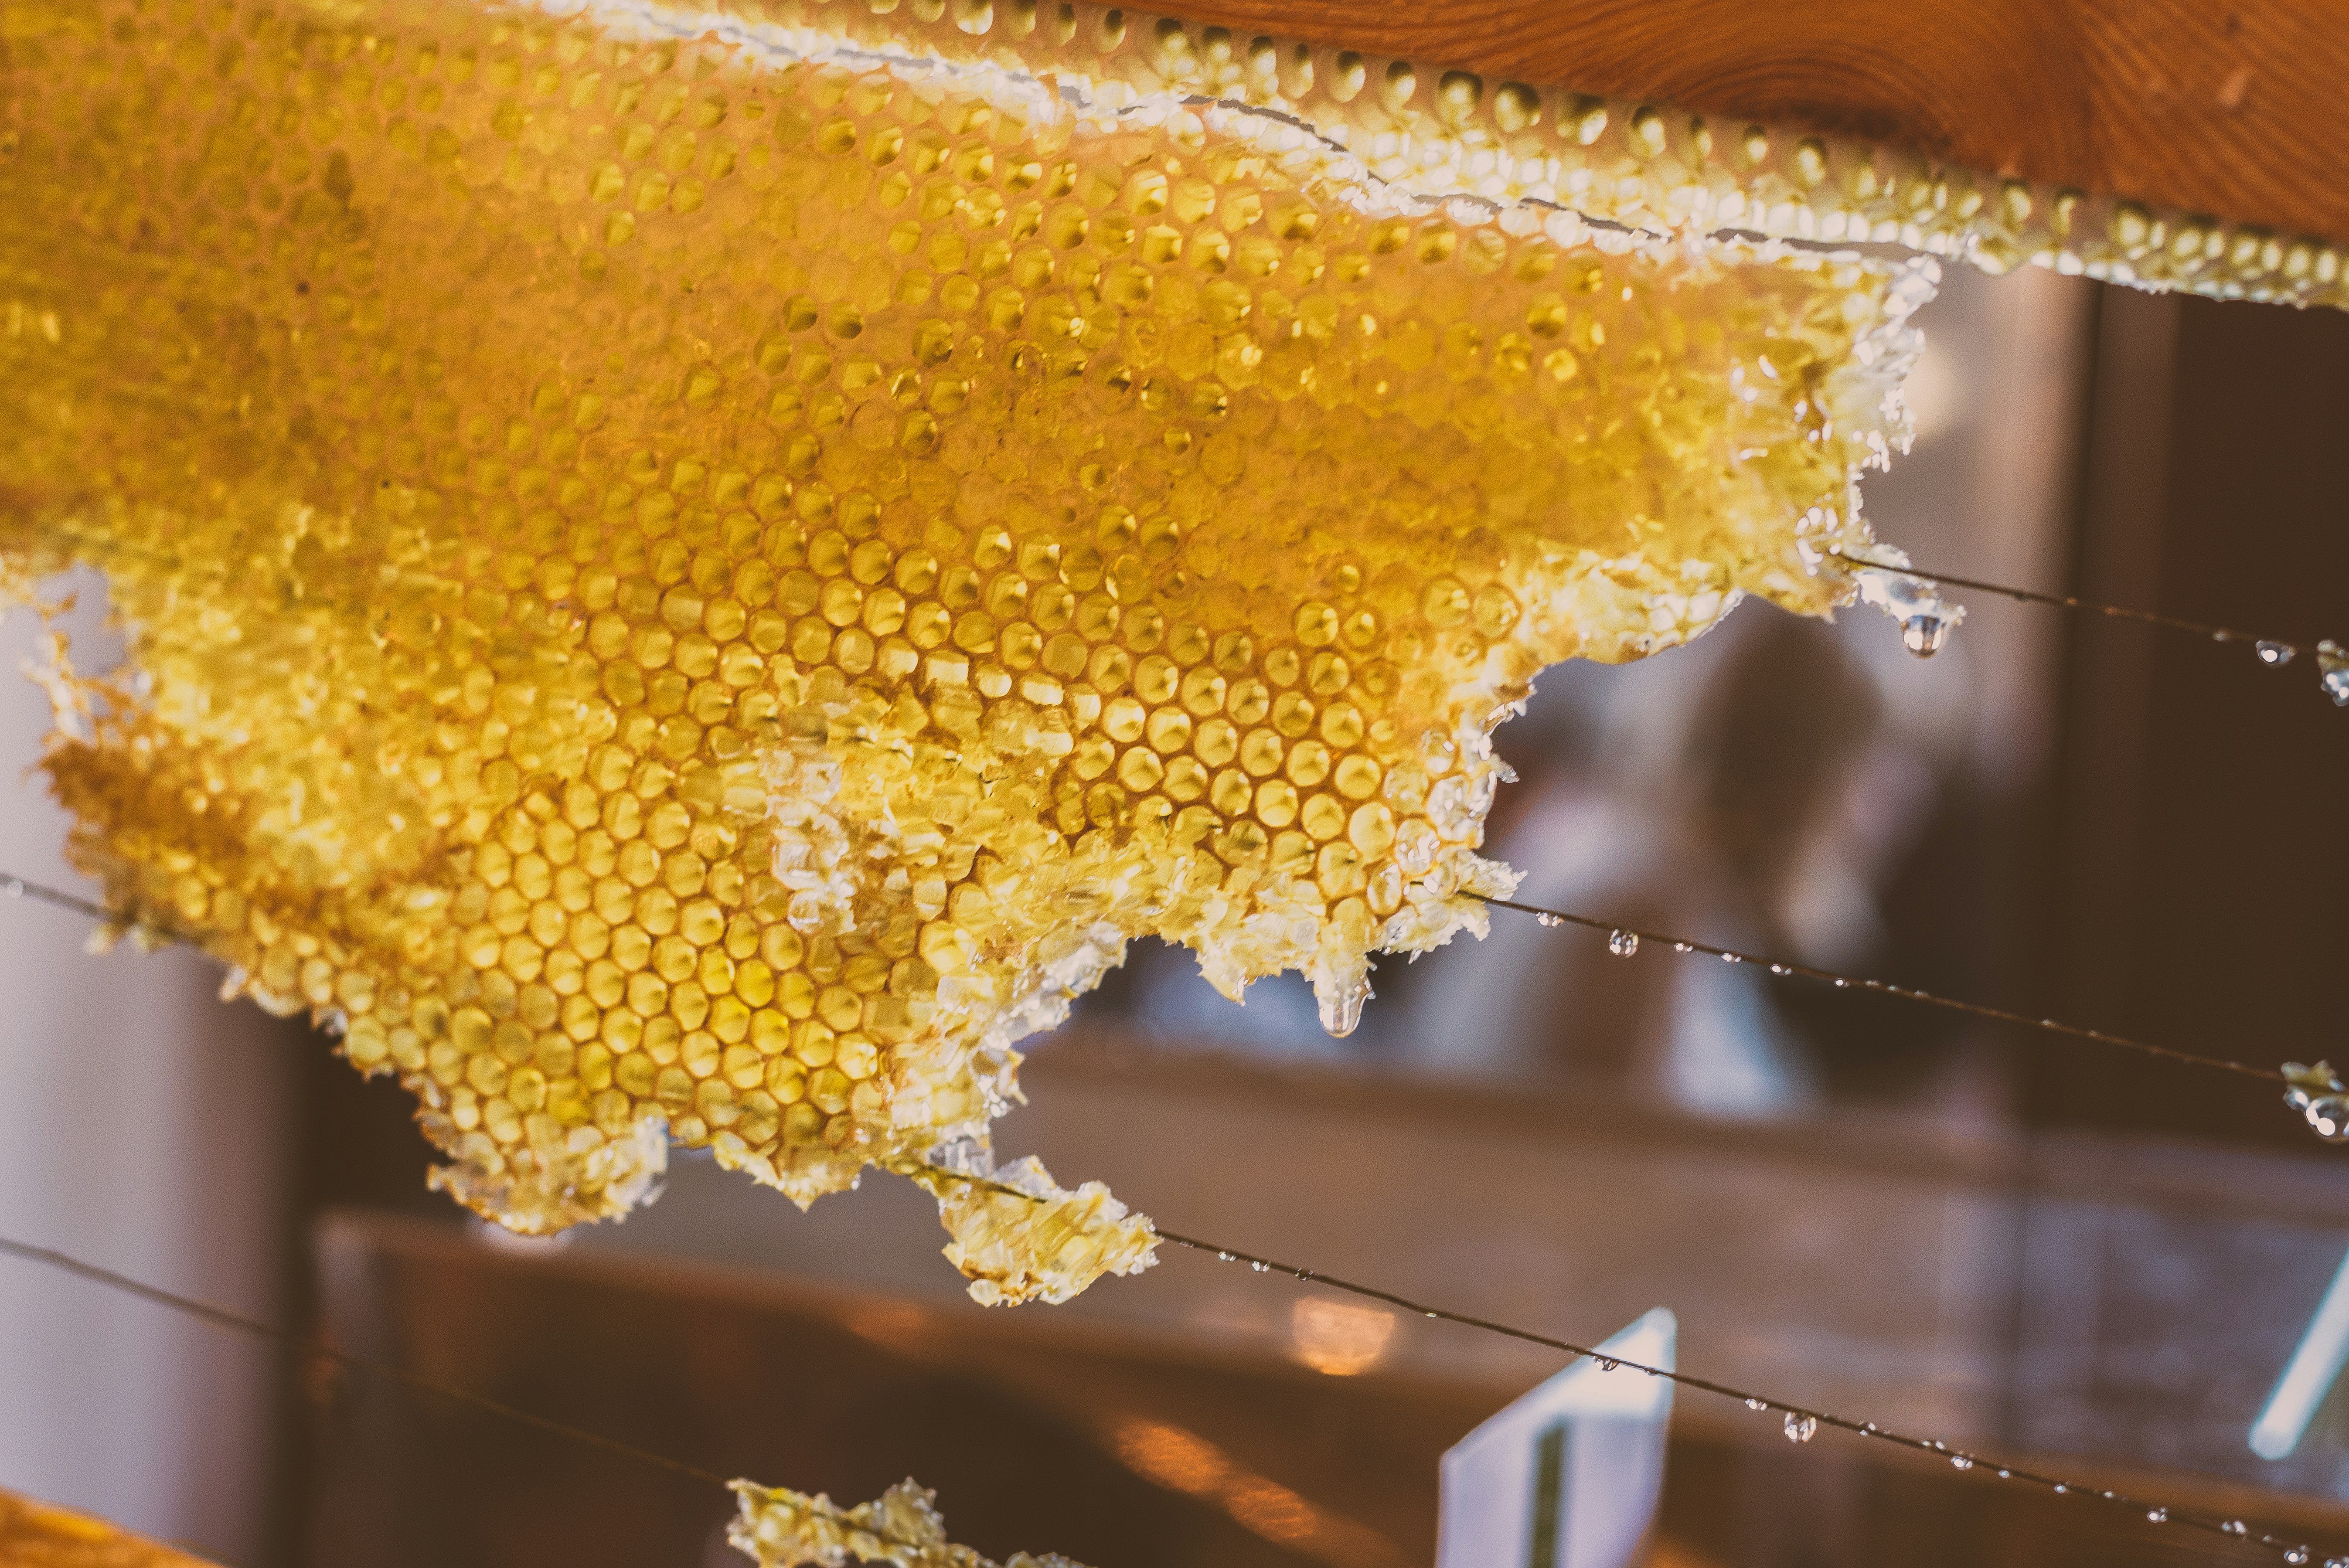 Fresh honeycomb dripping with honey on display